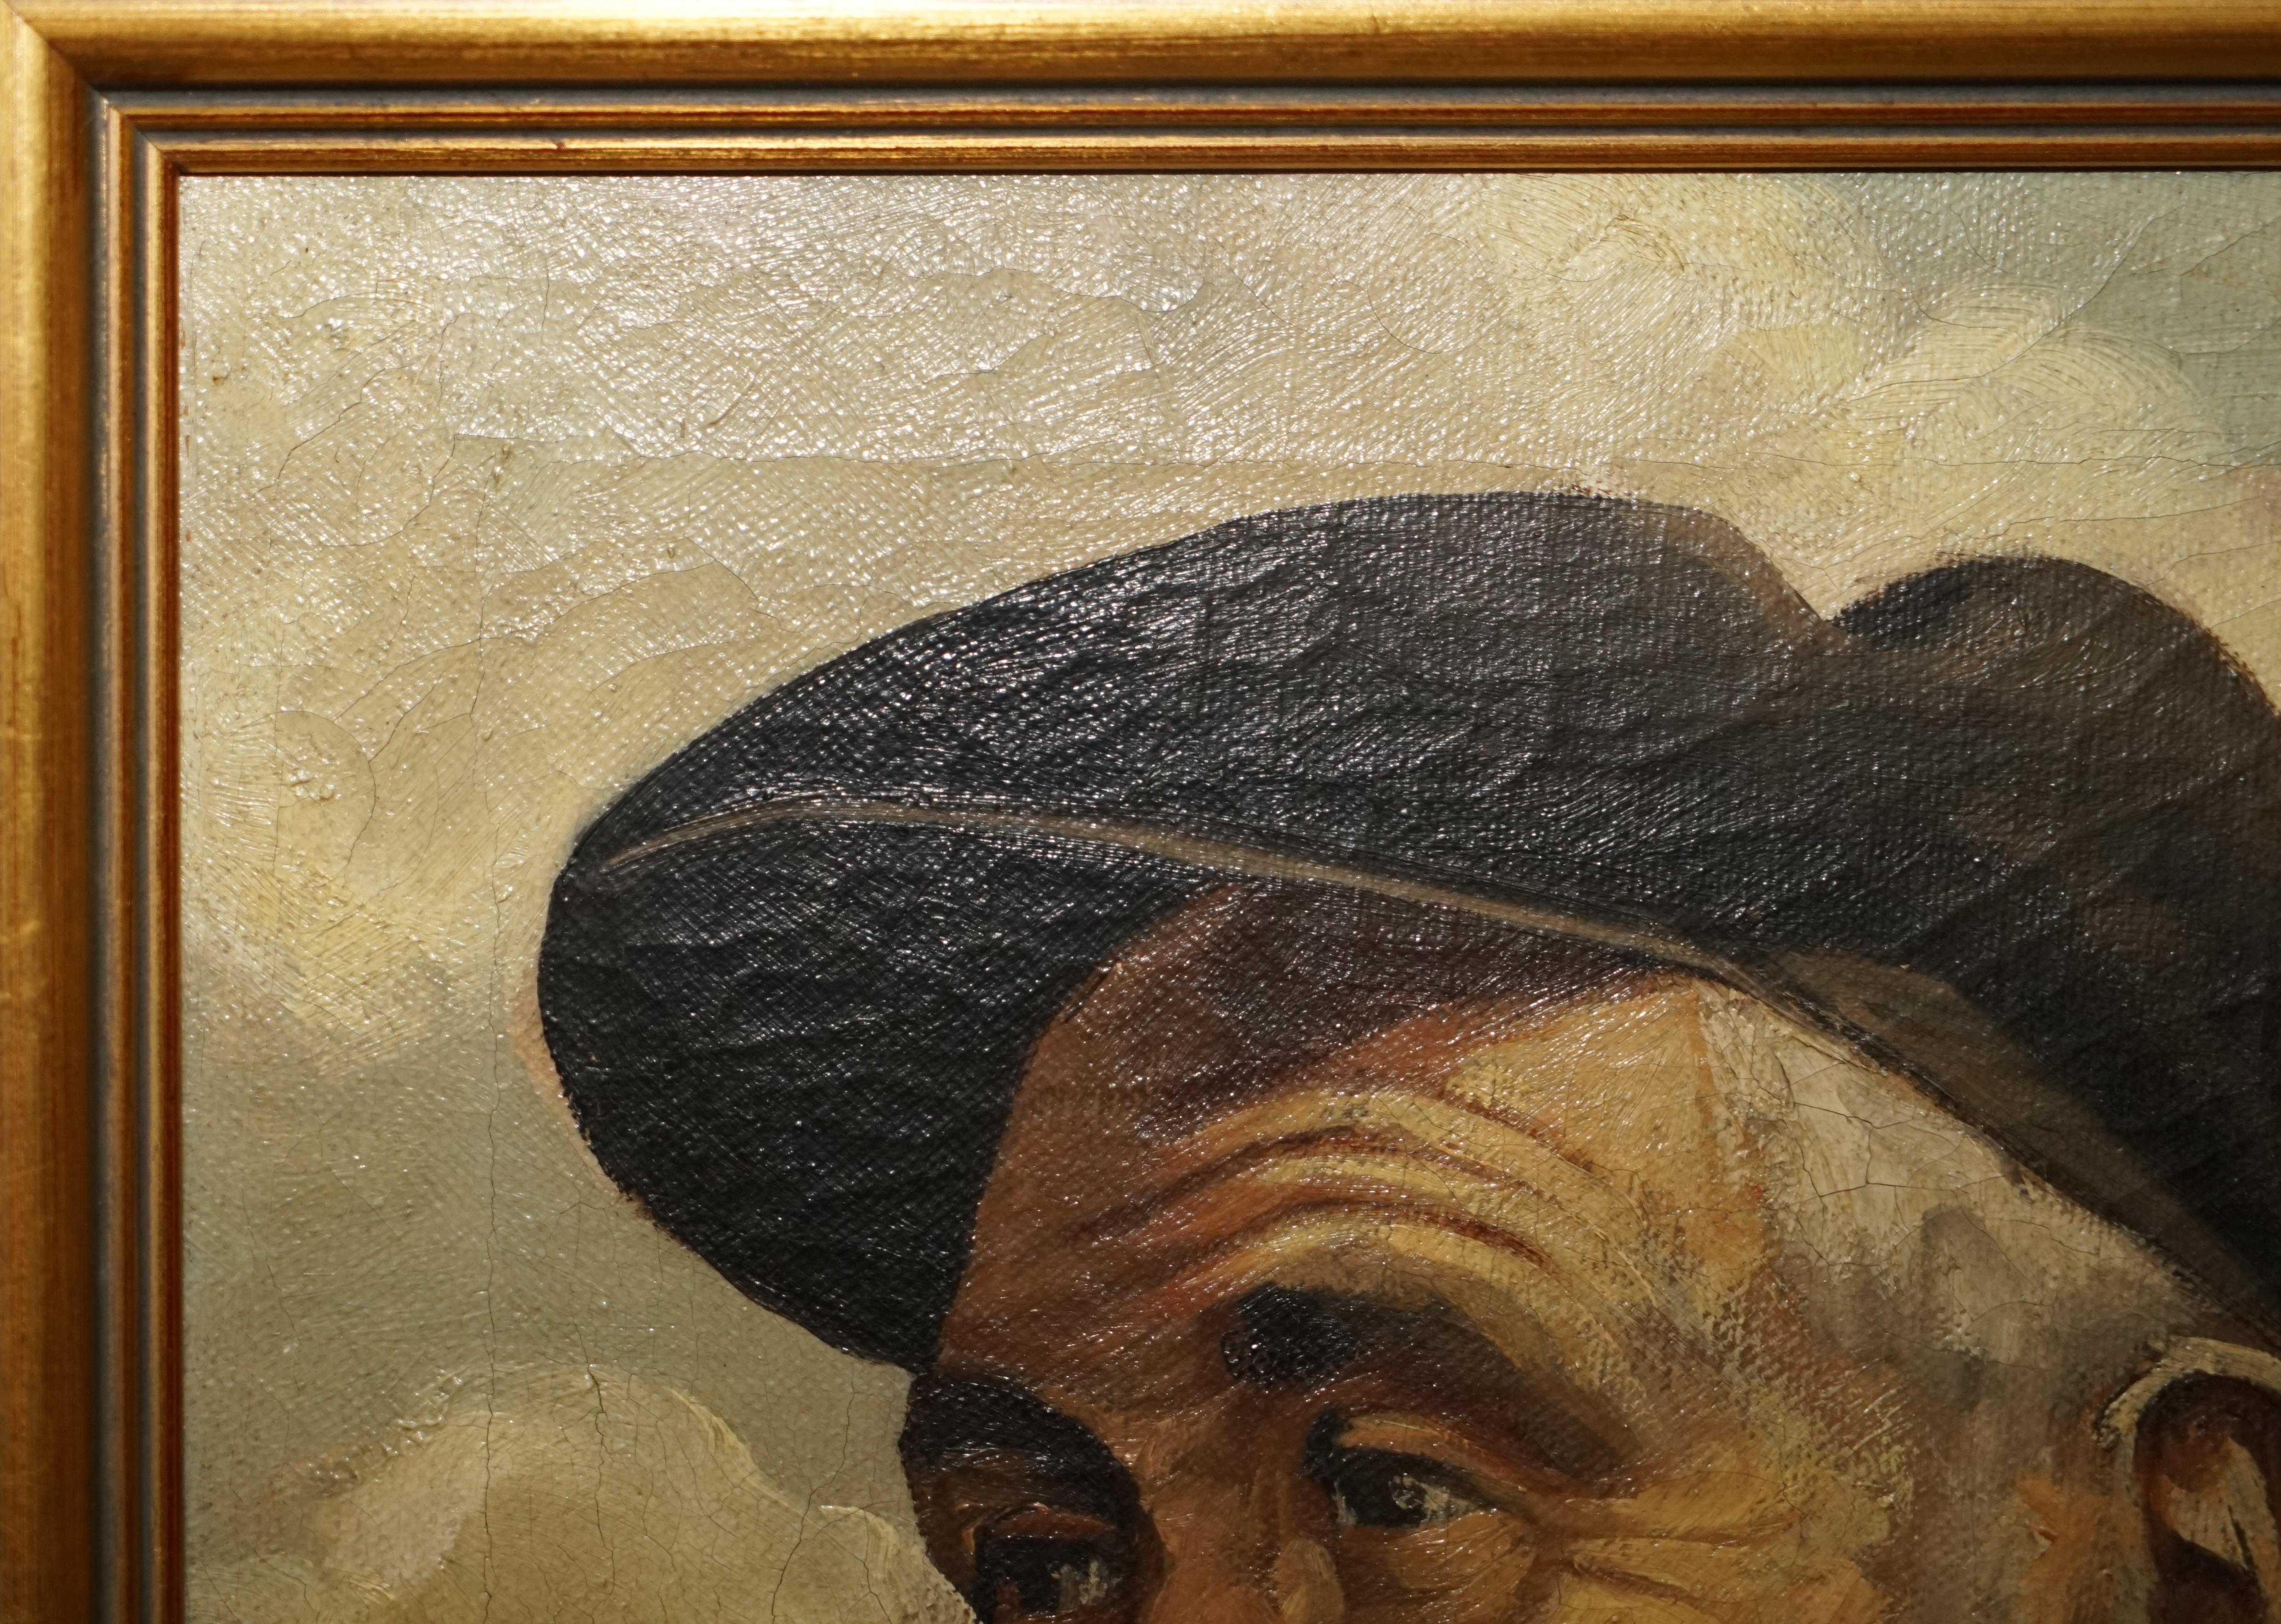 Victorian Jma Kensinck Signed Dutch Oil on Canvas Painting of Old Man Smoking a Pipe For Sale